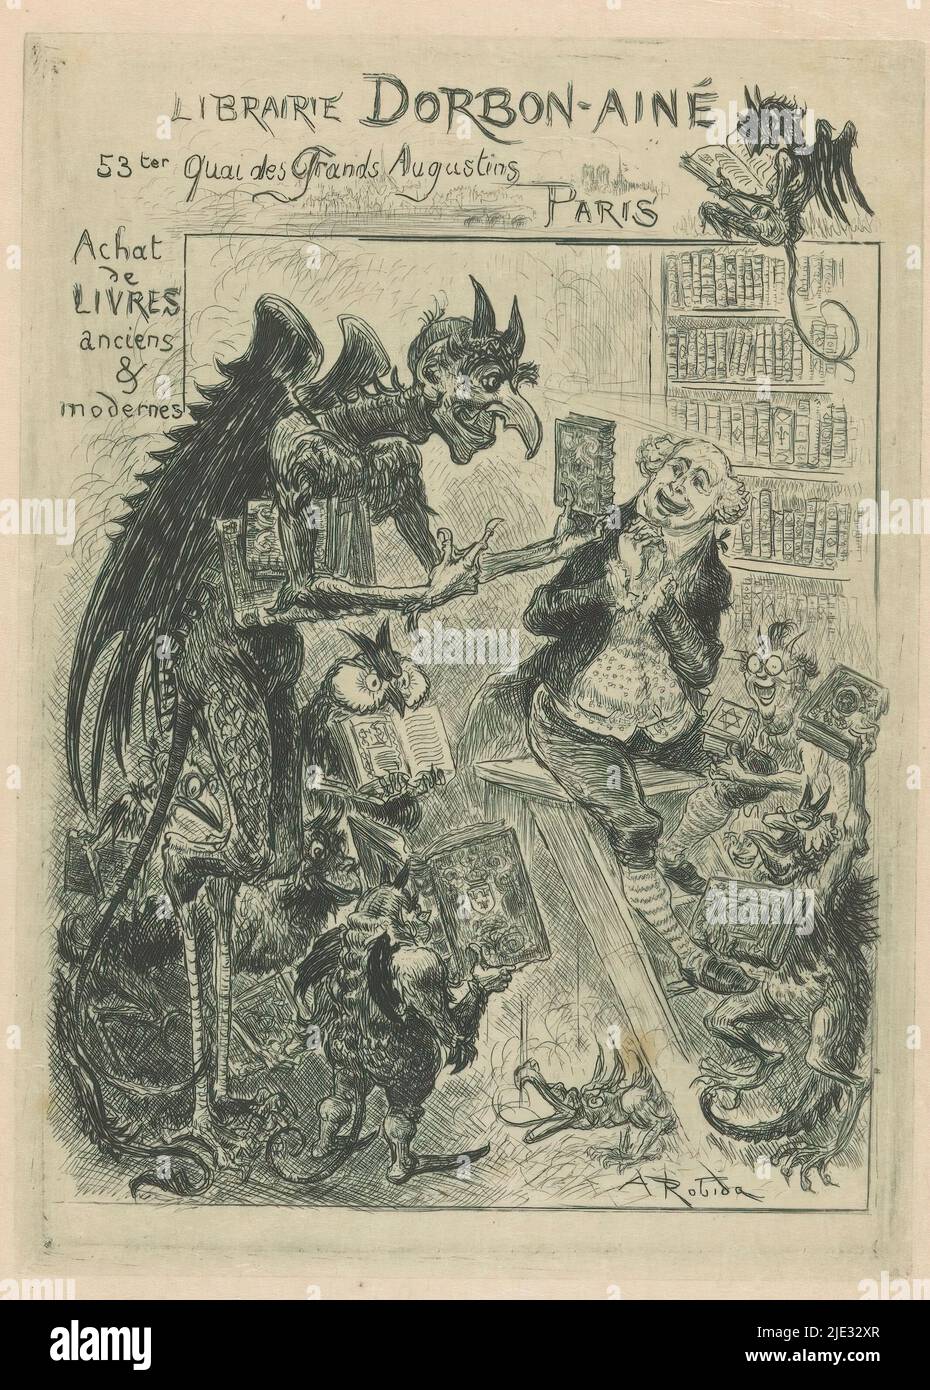 Business card of Dorbon-Ainé bookshop in Paris, Interior of a bookshop with in the center a devil with cocked legs, tail, wings and horns offering a book to a bookseller sitting on a library step in front of a bookcase. In the room eight other devils or fantasy figures, most of whom are holding books., print maker: Albert Robida, (mentioned on object), publisher: Librairie Dorbon-Ainé, (possibly), 1901 - 1924, paper, etching, drypoint, height 160 mm × width 116 mm Stock Photo